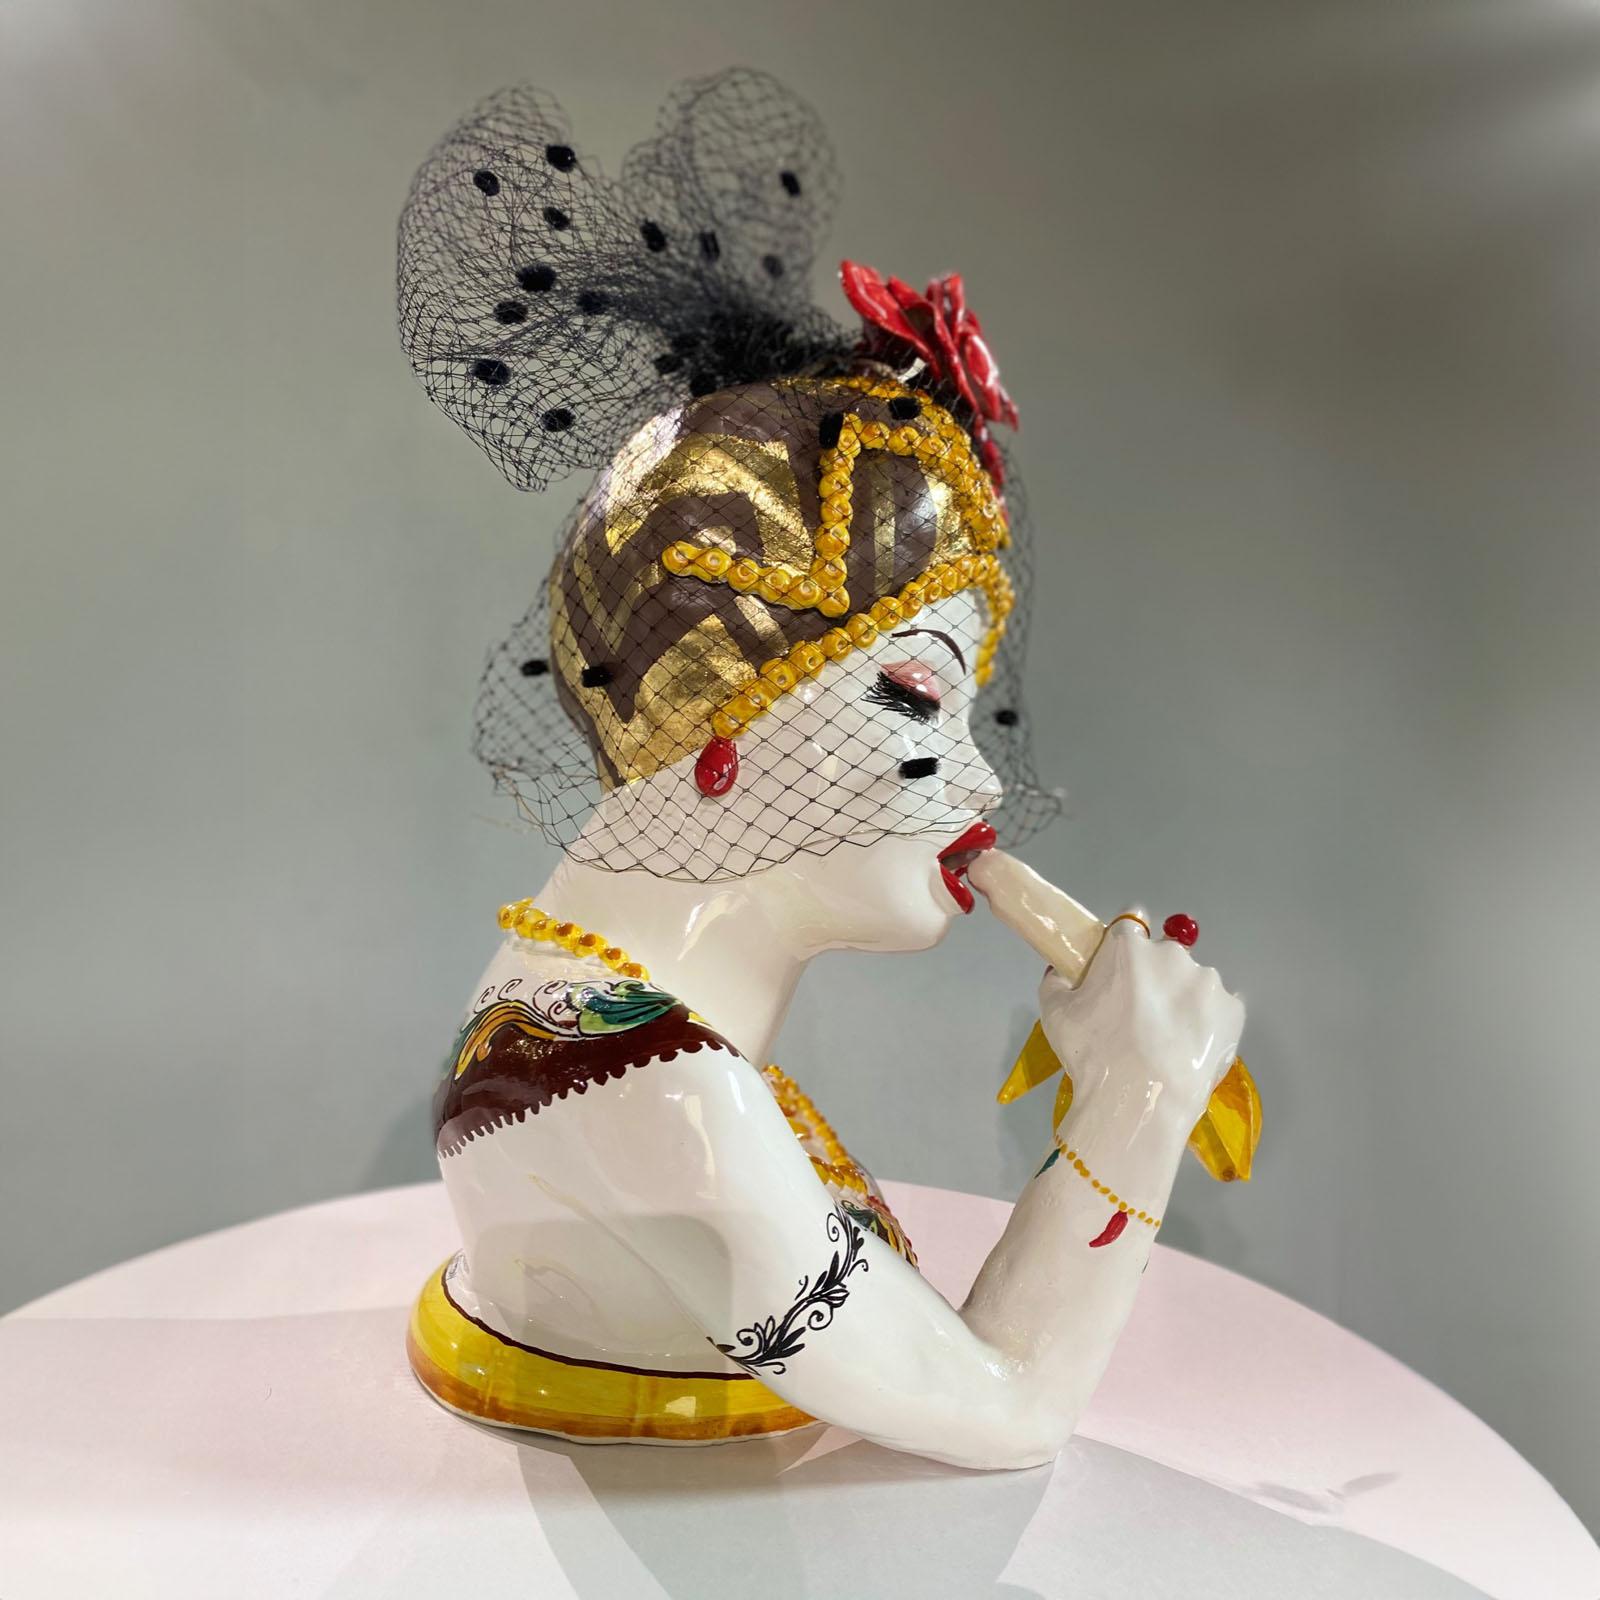 The “Surolù” art works - this is artistic identity chosen by Vanessa Semaino - arise from the artist 's need to represent women’s condition today, particularly in their emotional states that confer their unique identities. These precious ceramic